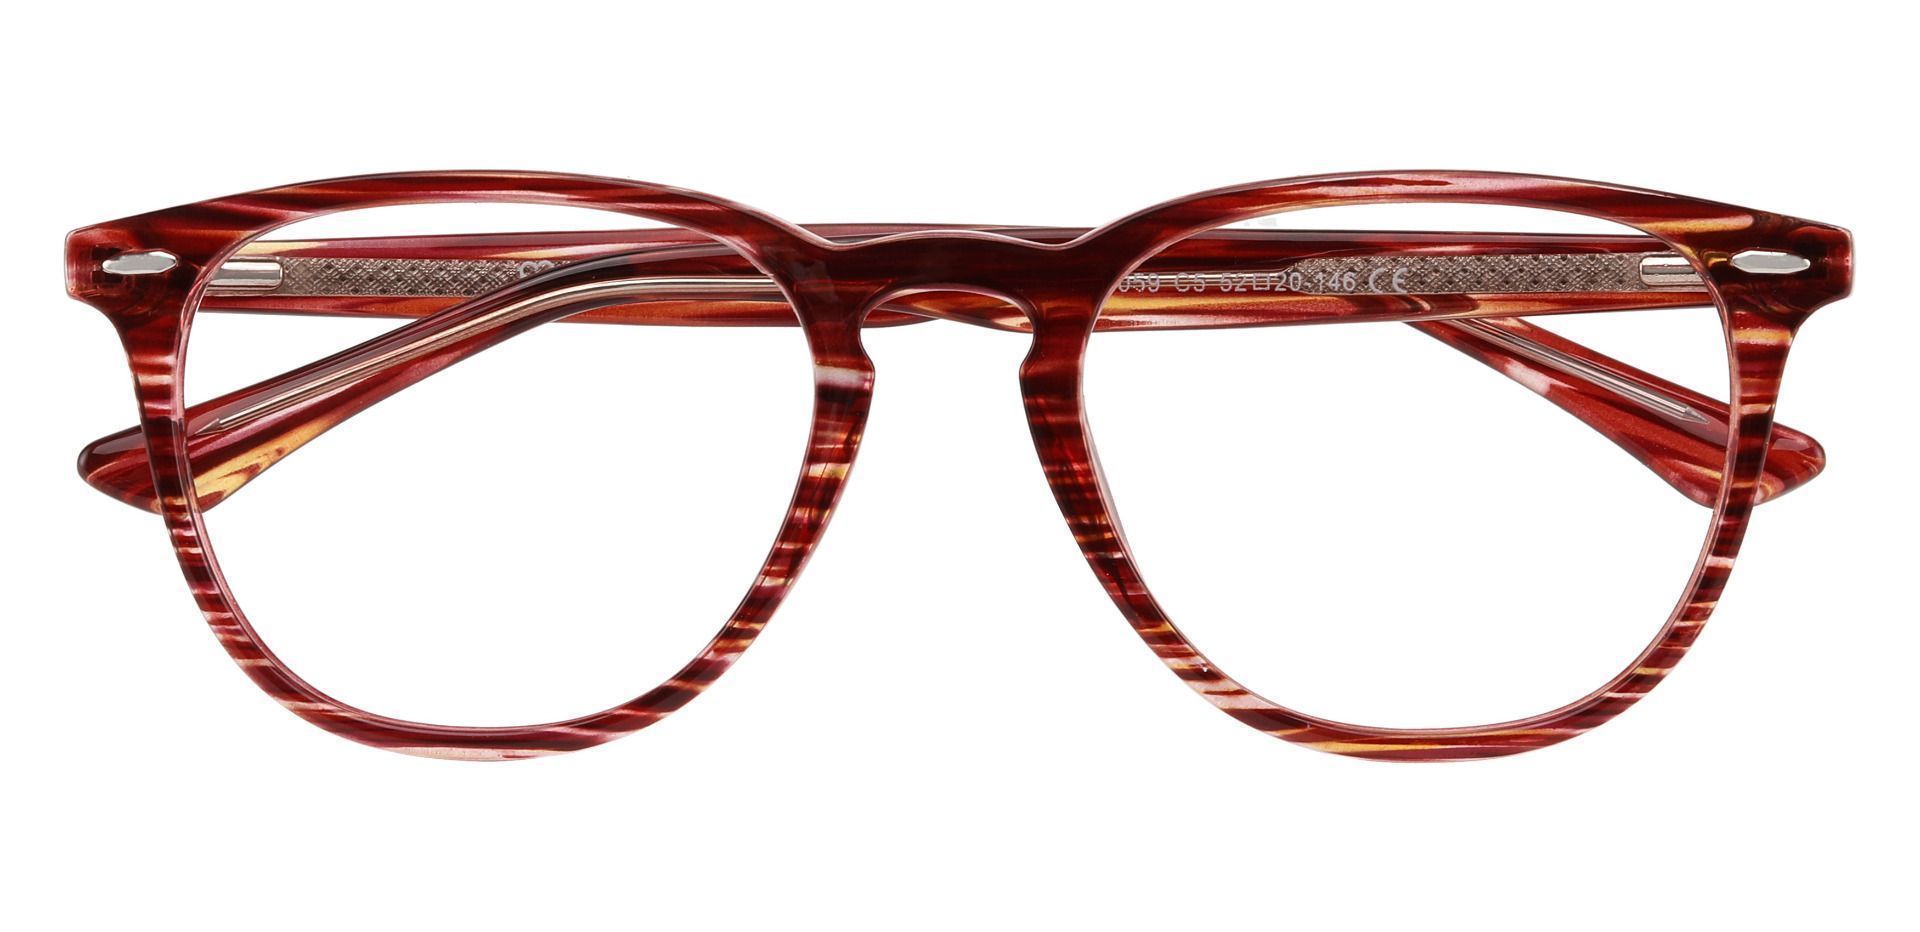 Sycamore Oval Lined Bifocal Glasses - Red